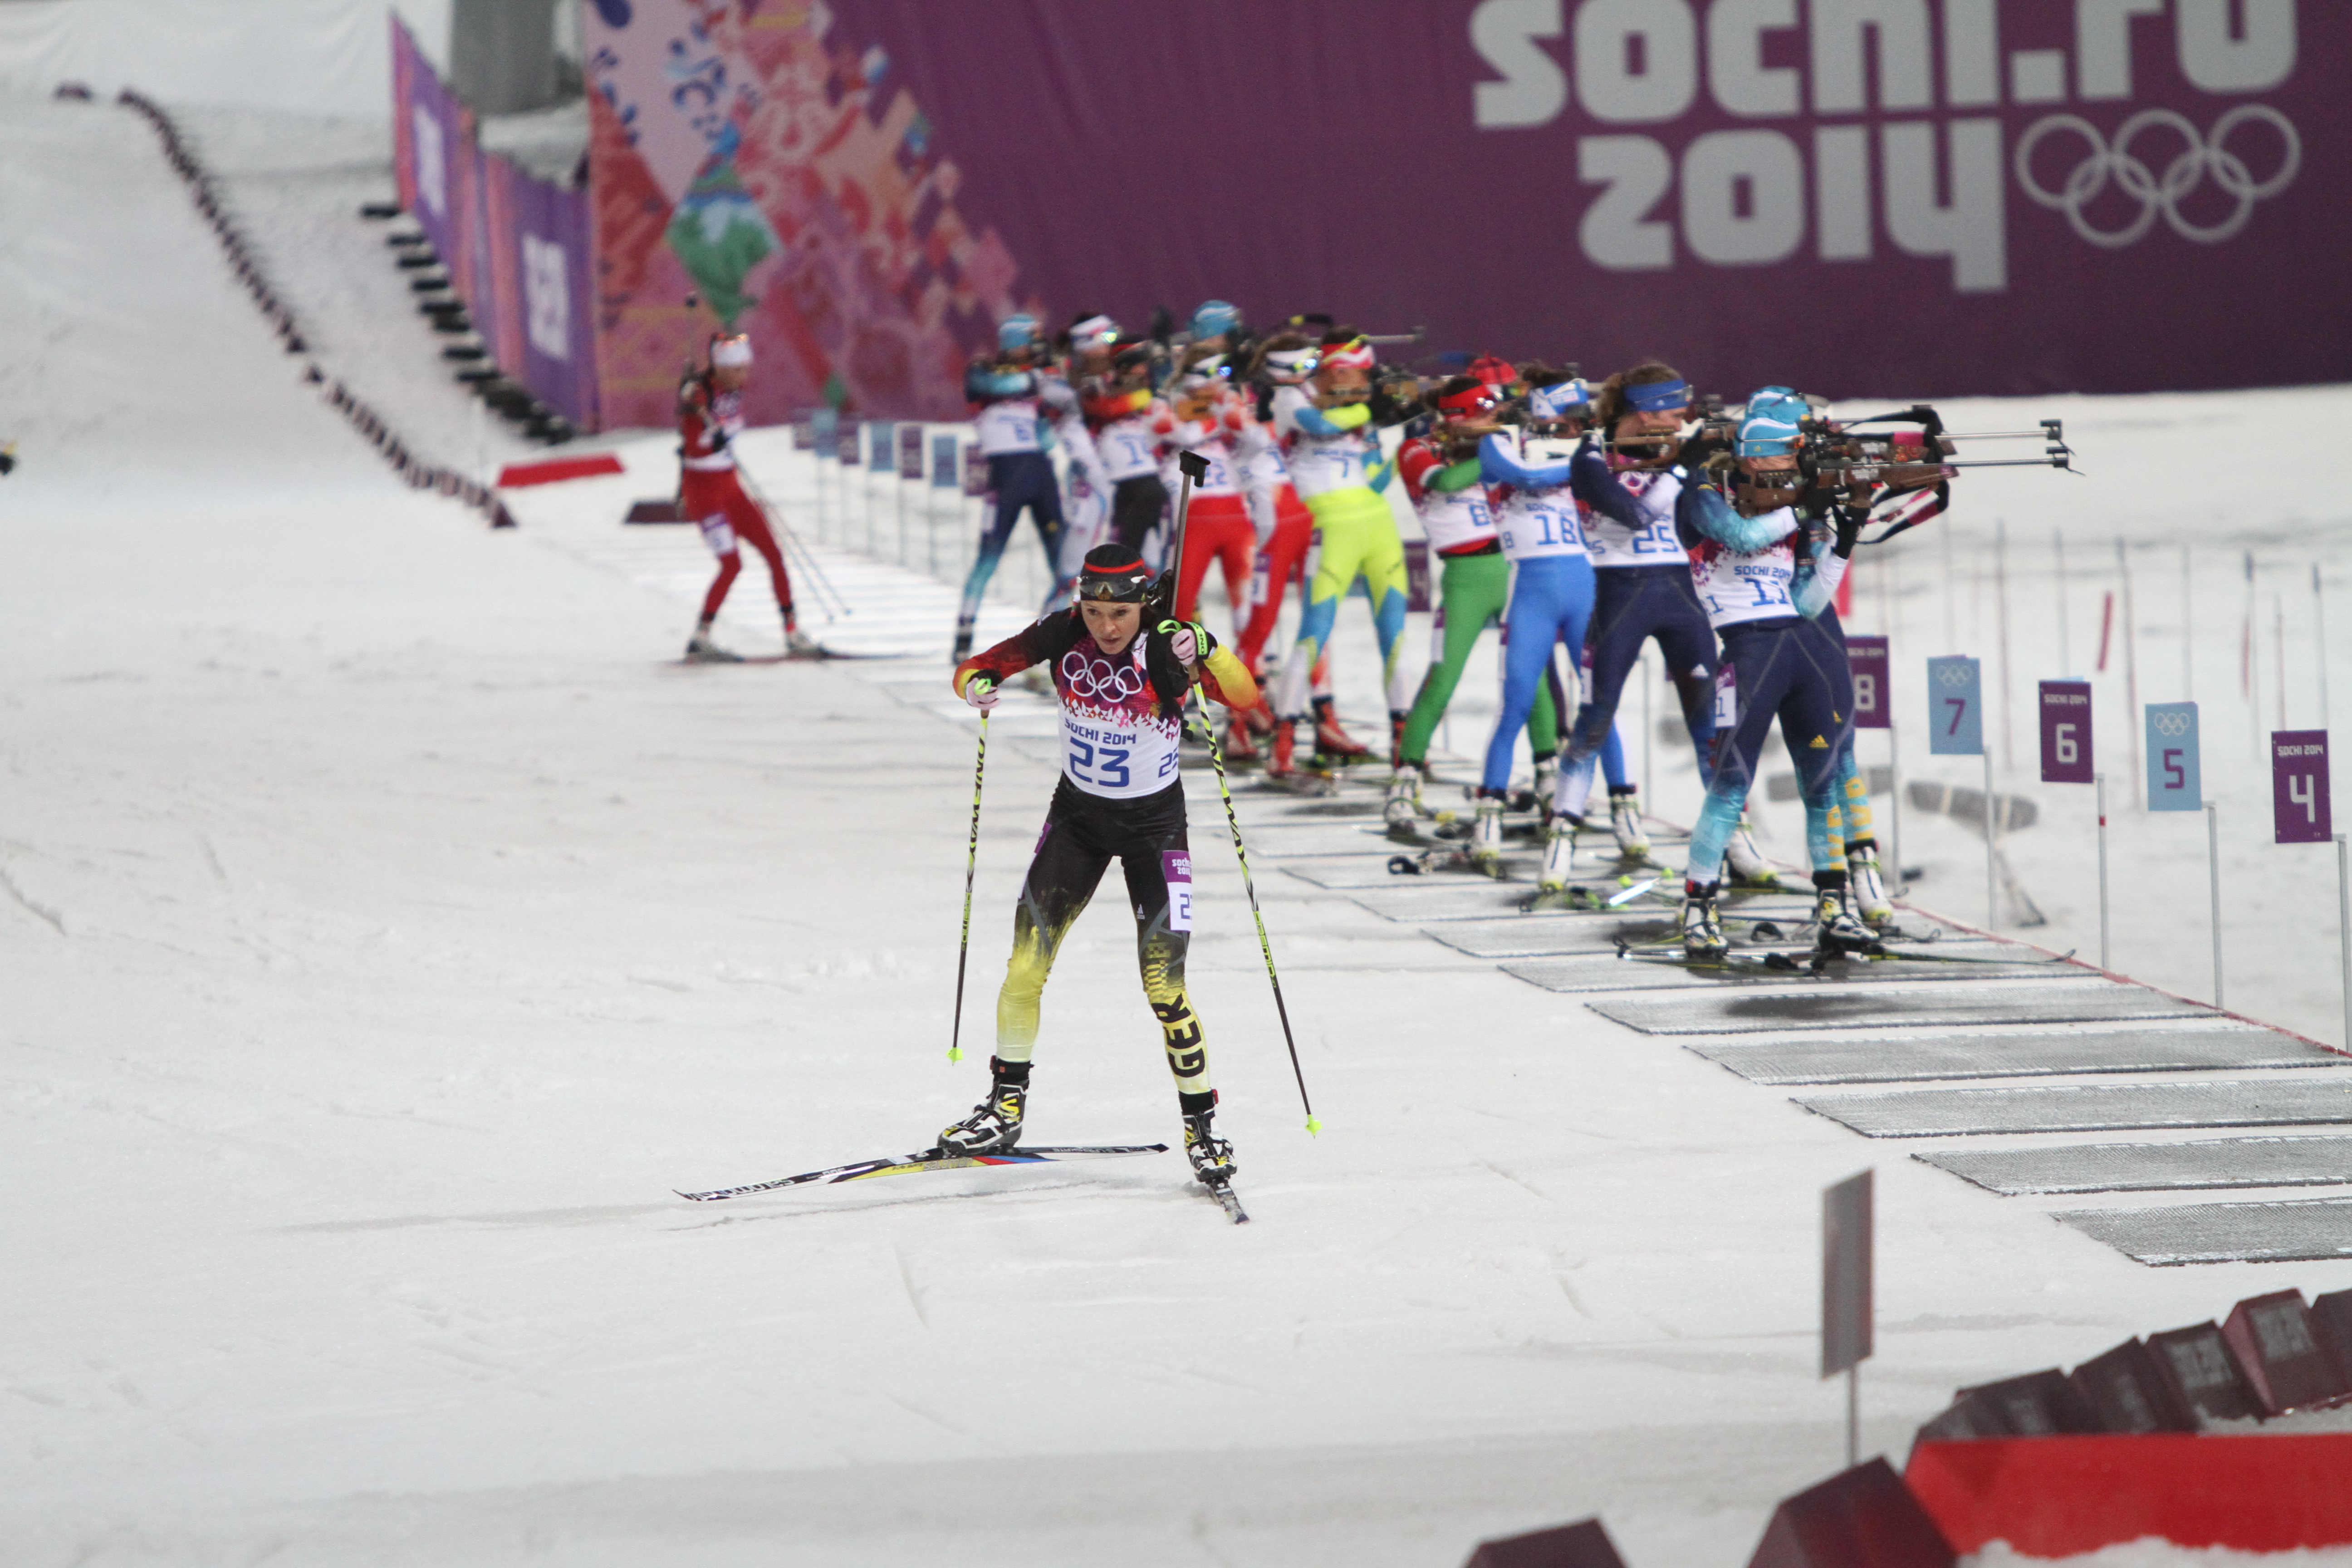 Germany's Evi Sachenbacher-Stehle leaving the range during the 2014 Olympic mass start race. She placed fourth, but was later disqualified after testing positive for a banned stimulant.